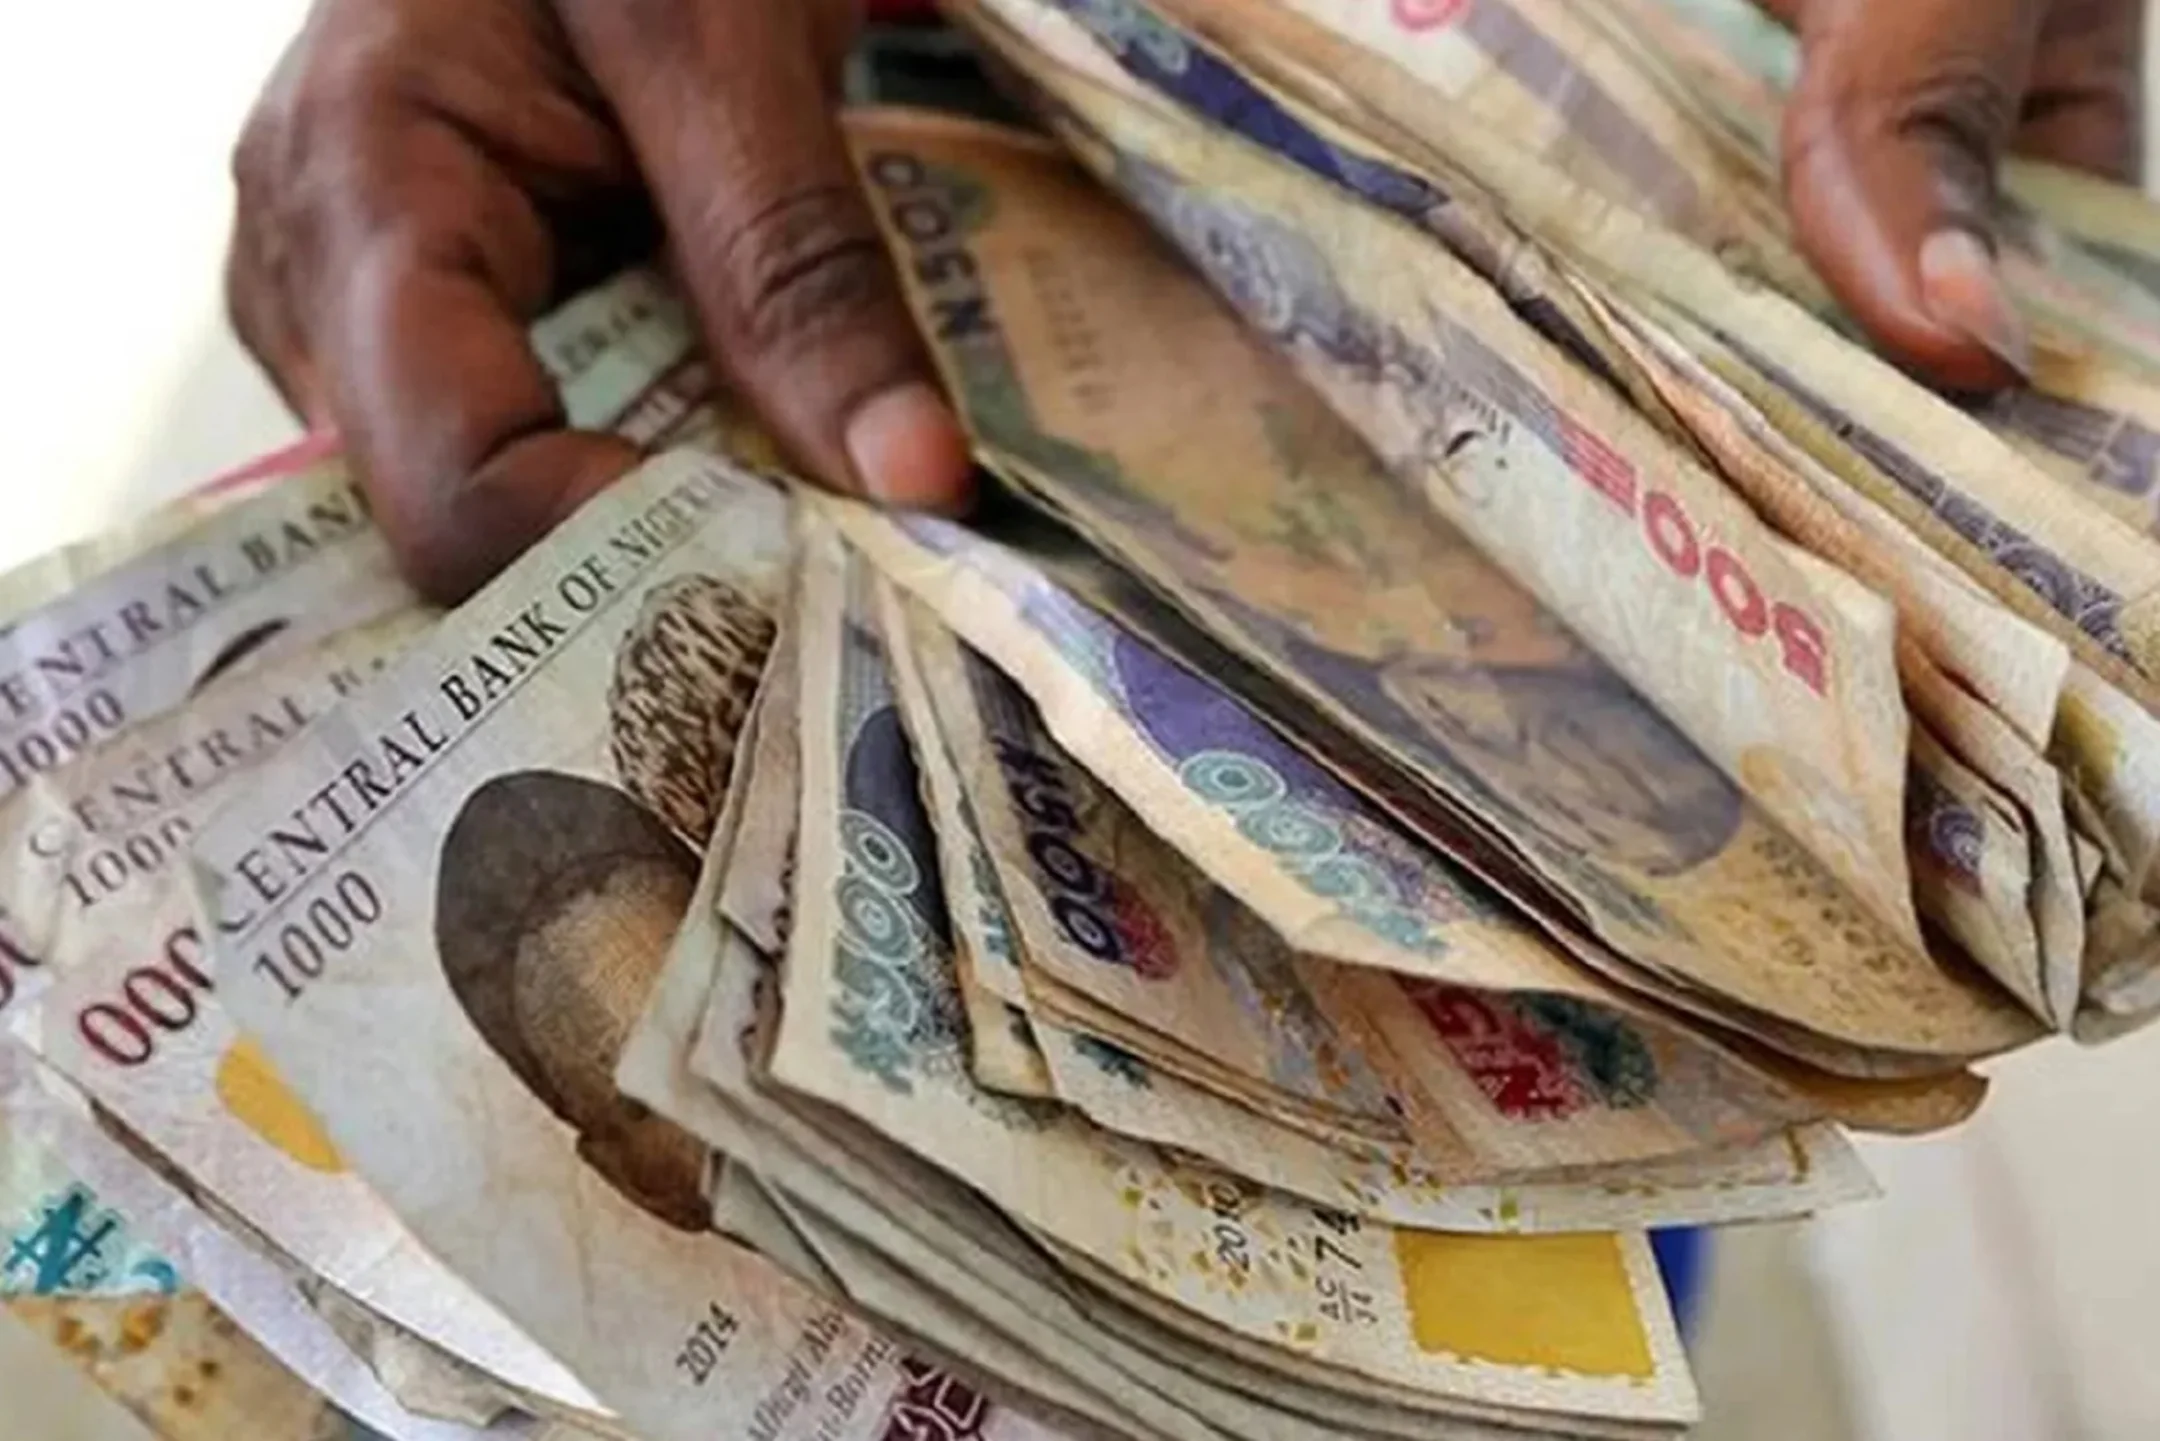 April Sees Naira’s Depreciation of N112 Against Dollar in Forex Market